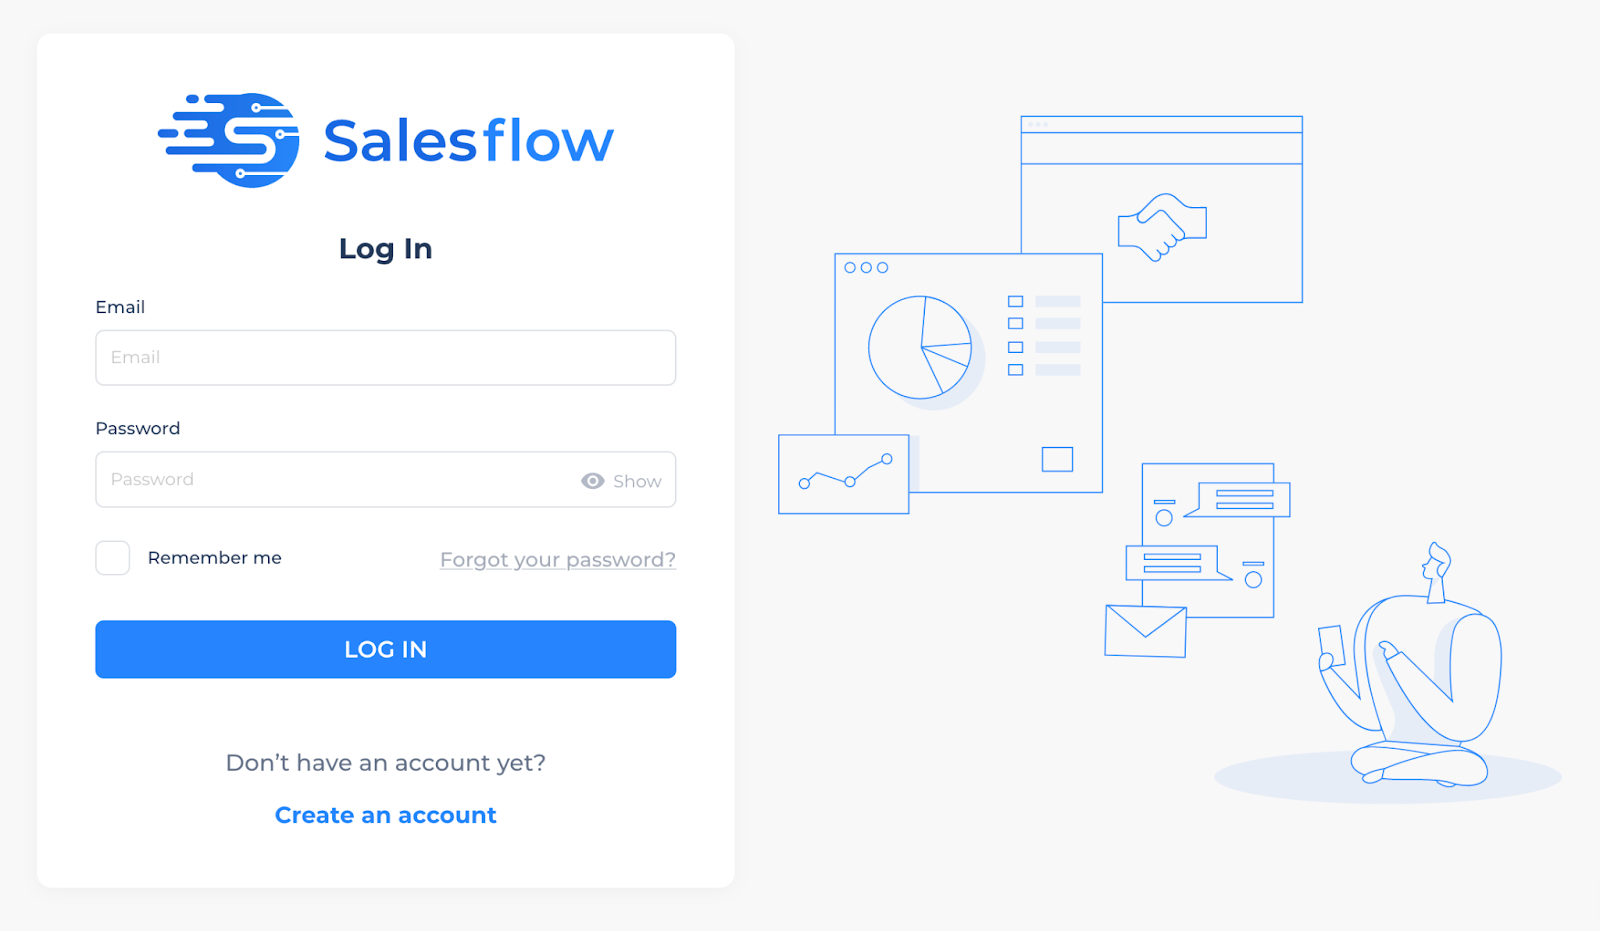 Sign in to your Salesflow account